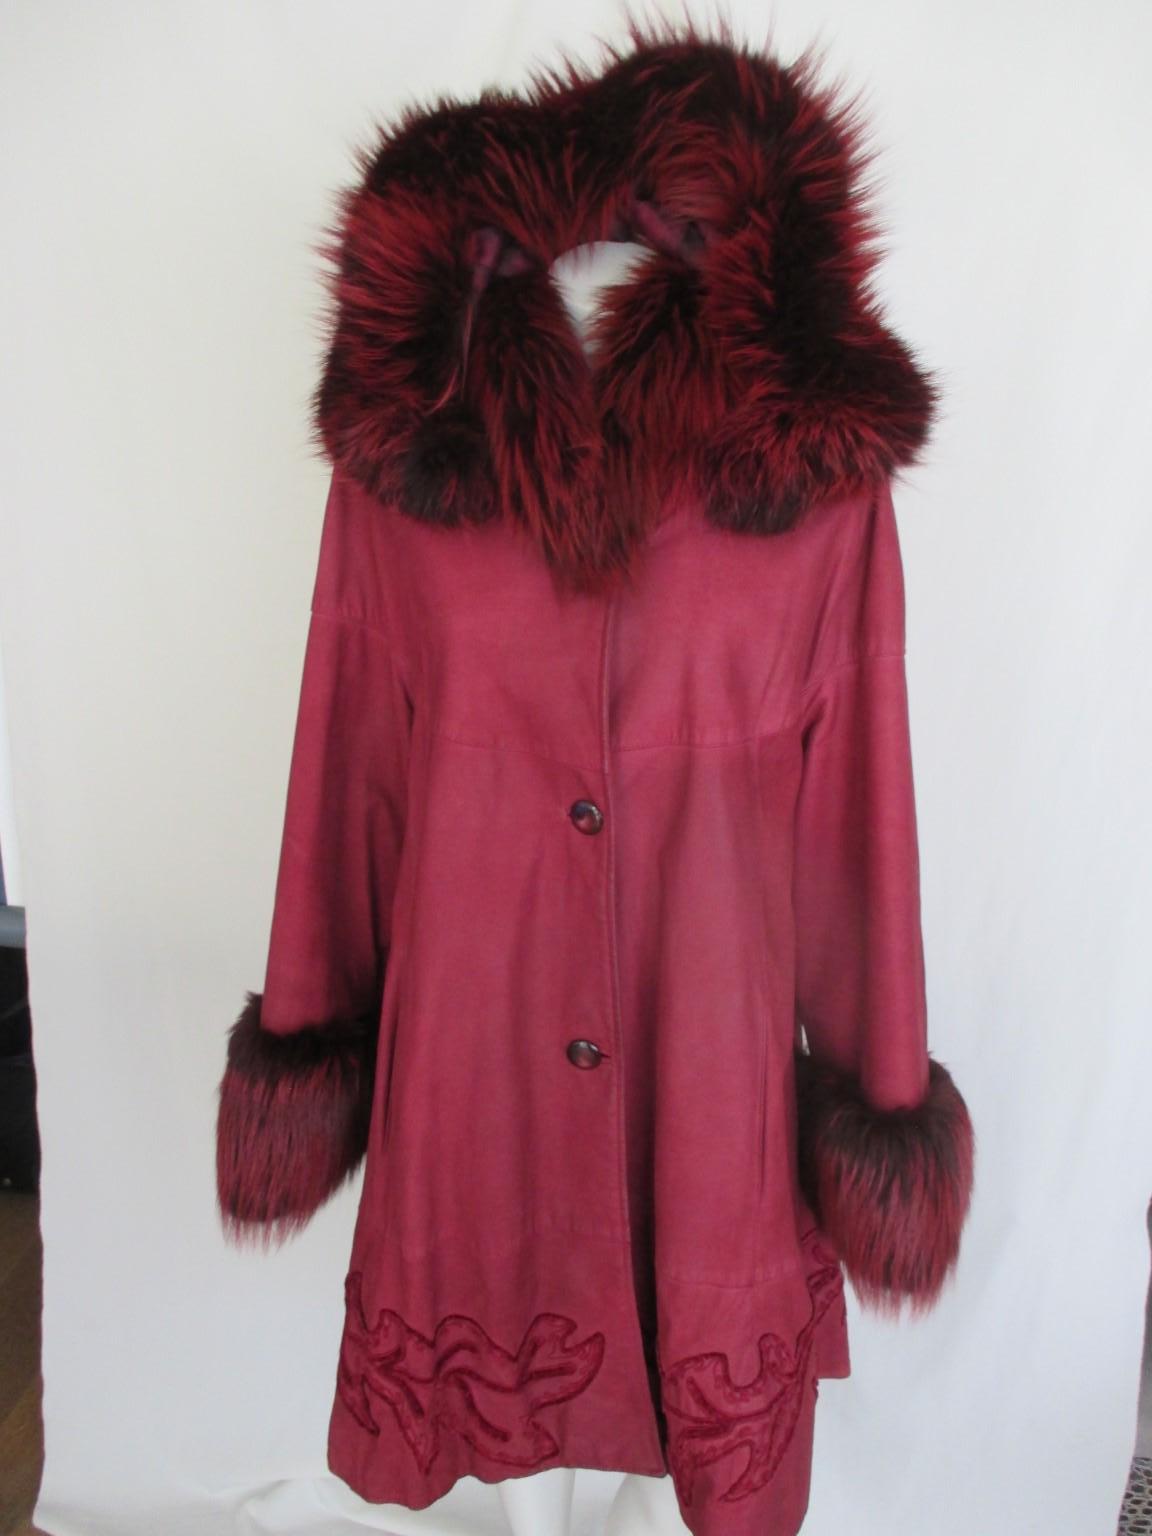 Flared suede leather coat with attached hood and fox fur

 We offer more luxury fur and vintage items, view our frontstore.

Details:
With 2 pockets, 3 buttons, fully lined
Detachable hood with buttons
Size: L
Lenght 93 cm
Bust 120 cm
sleeves 60 cm